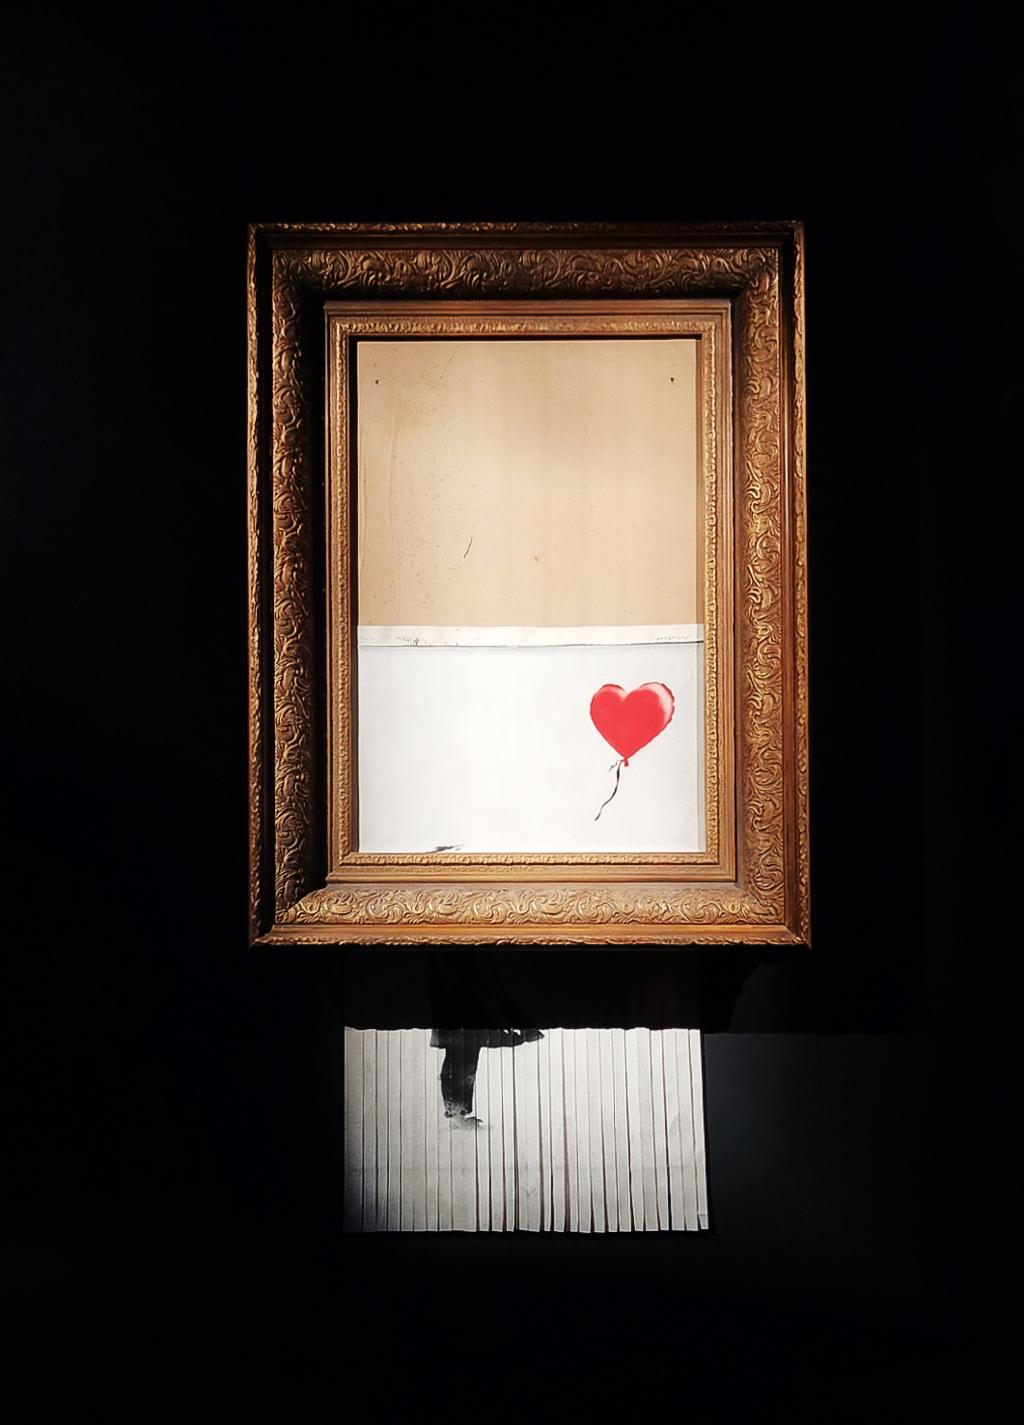 Banksy's famous picture "Girl With Ballon" has been half shredded, partly hanging out of the frame. Photo.